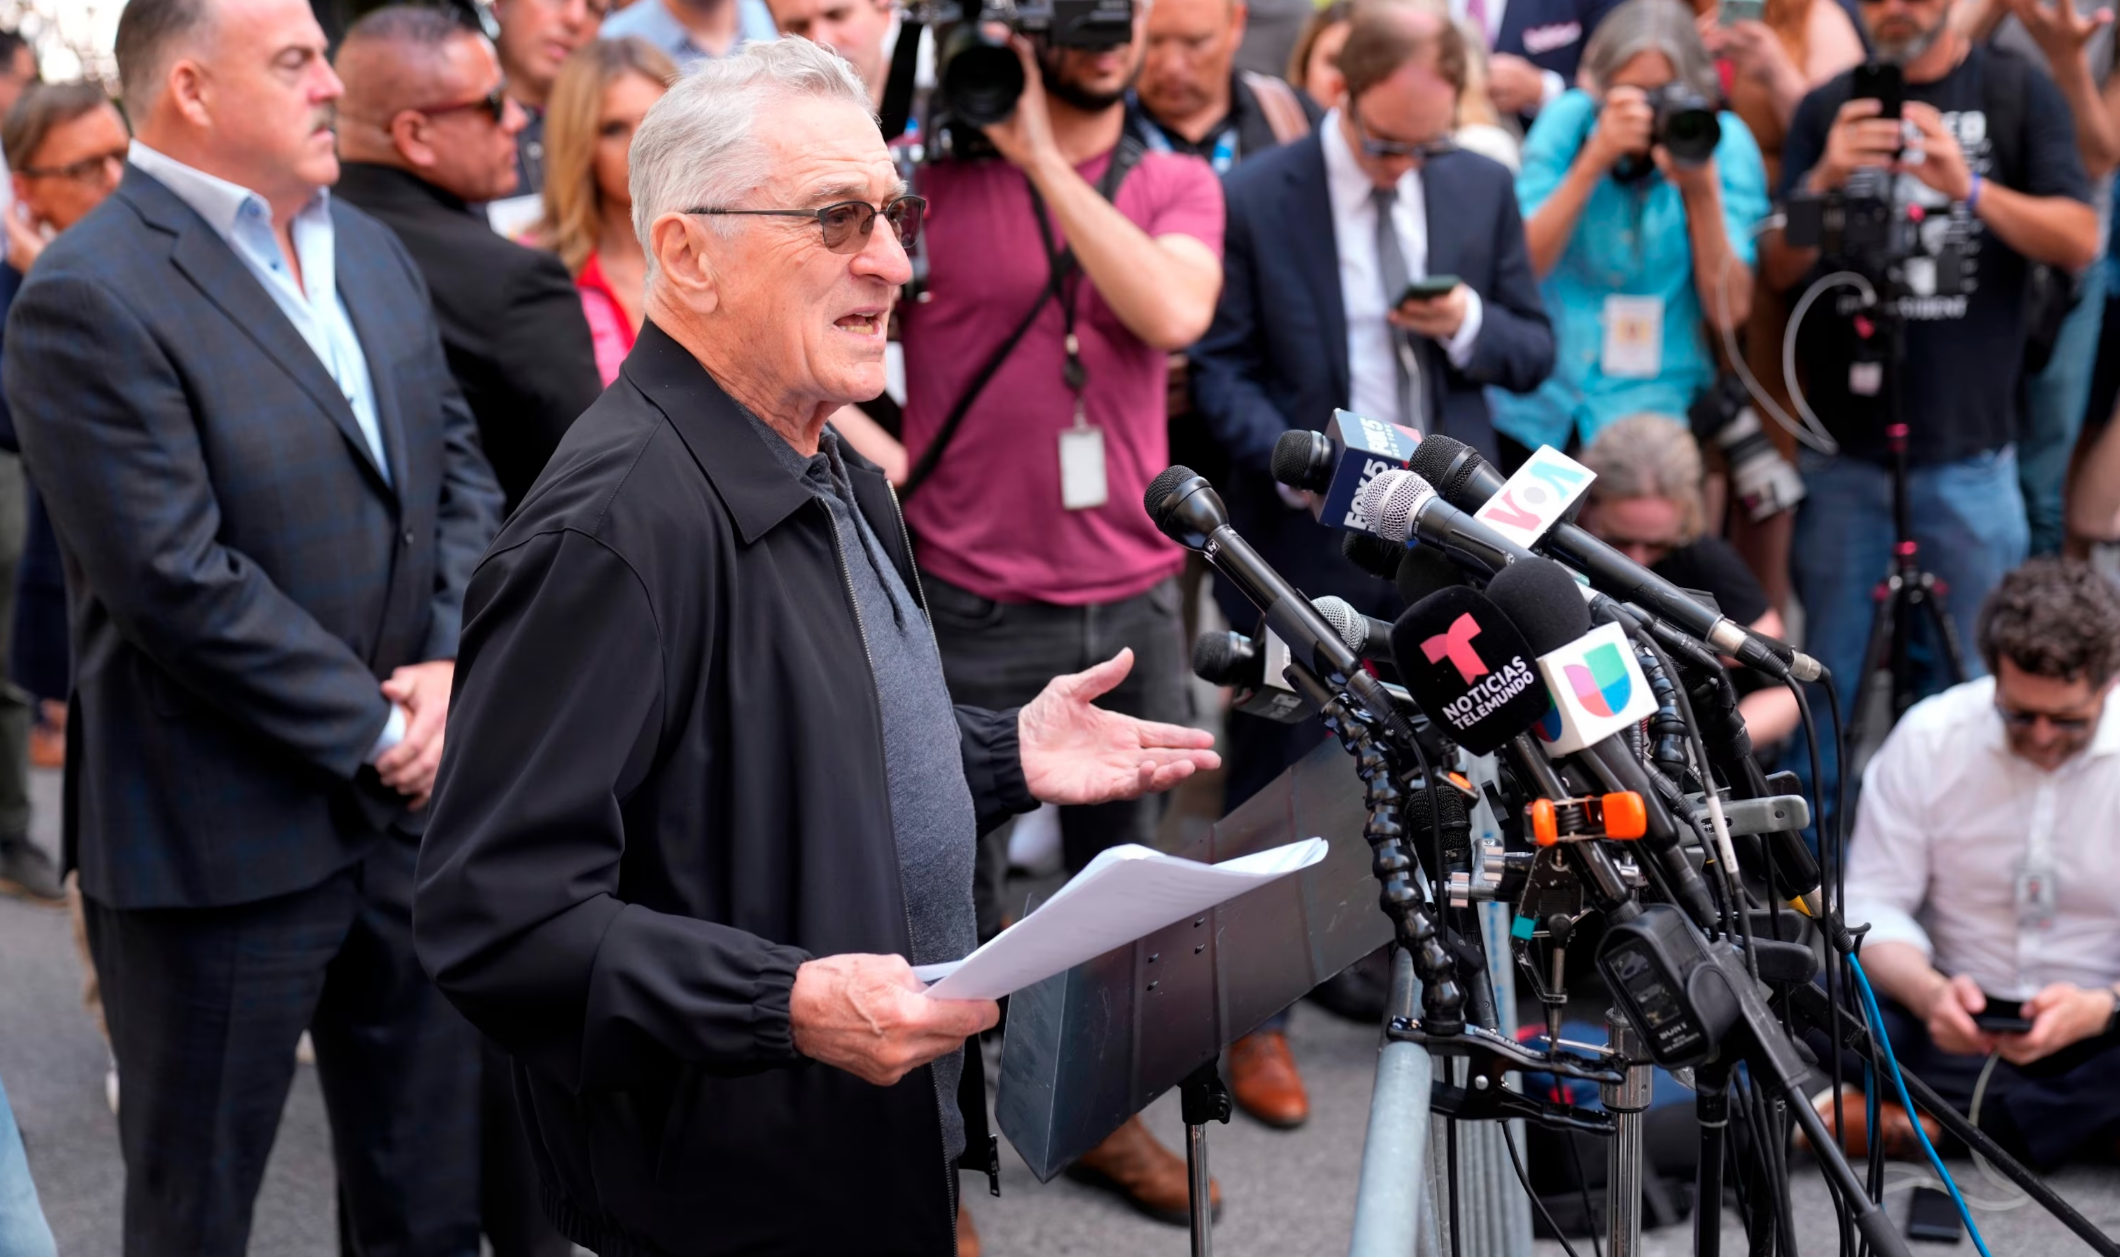 De Niro’s Courthouse Turn Shows He Has Always Been a Hack